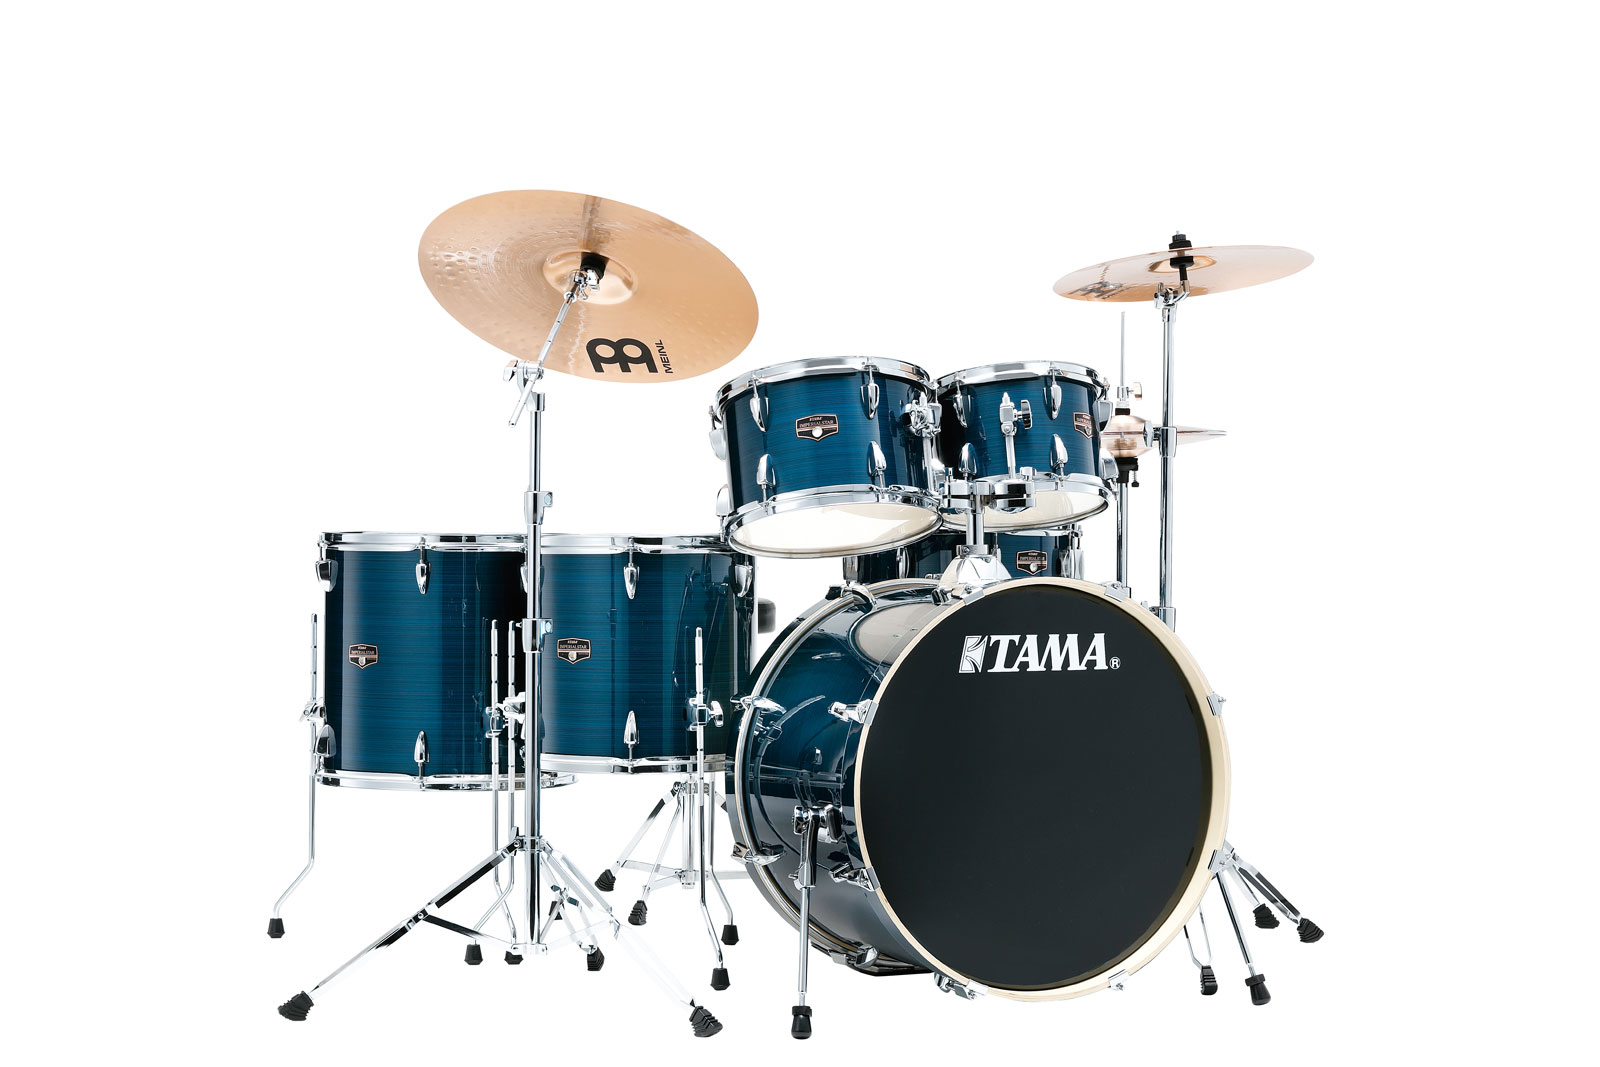 IMPERIALSTAR STAGE 22 + CYMBALES MCS HAIRLINE BLUE 